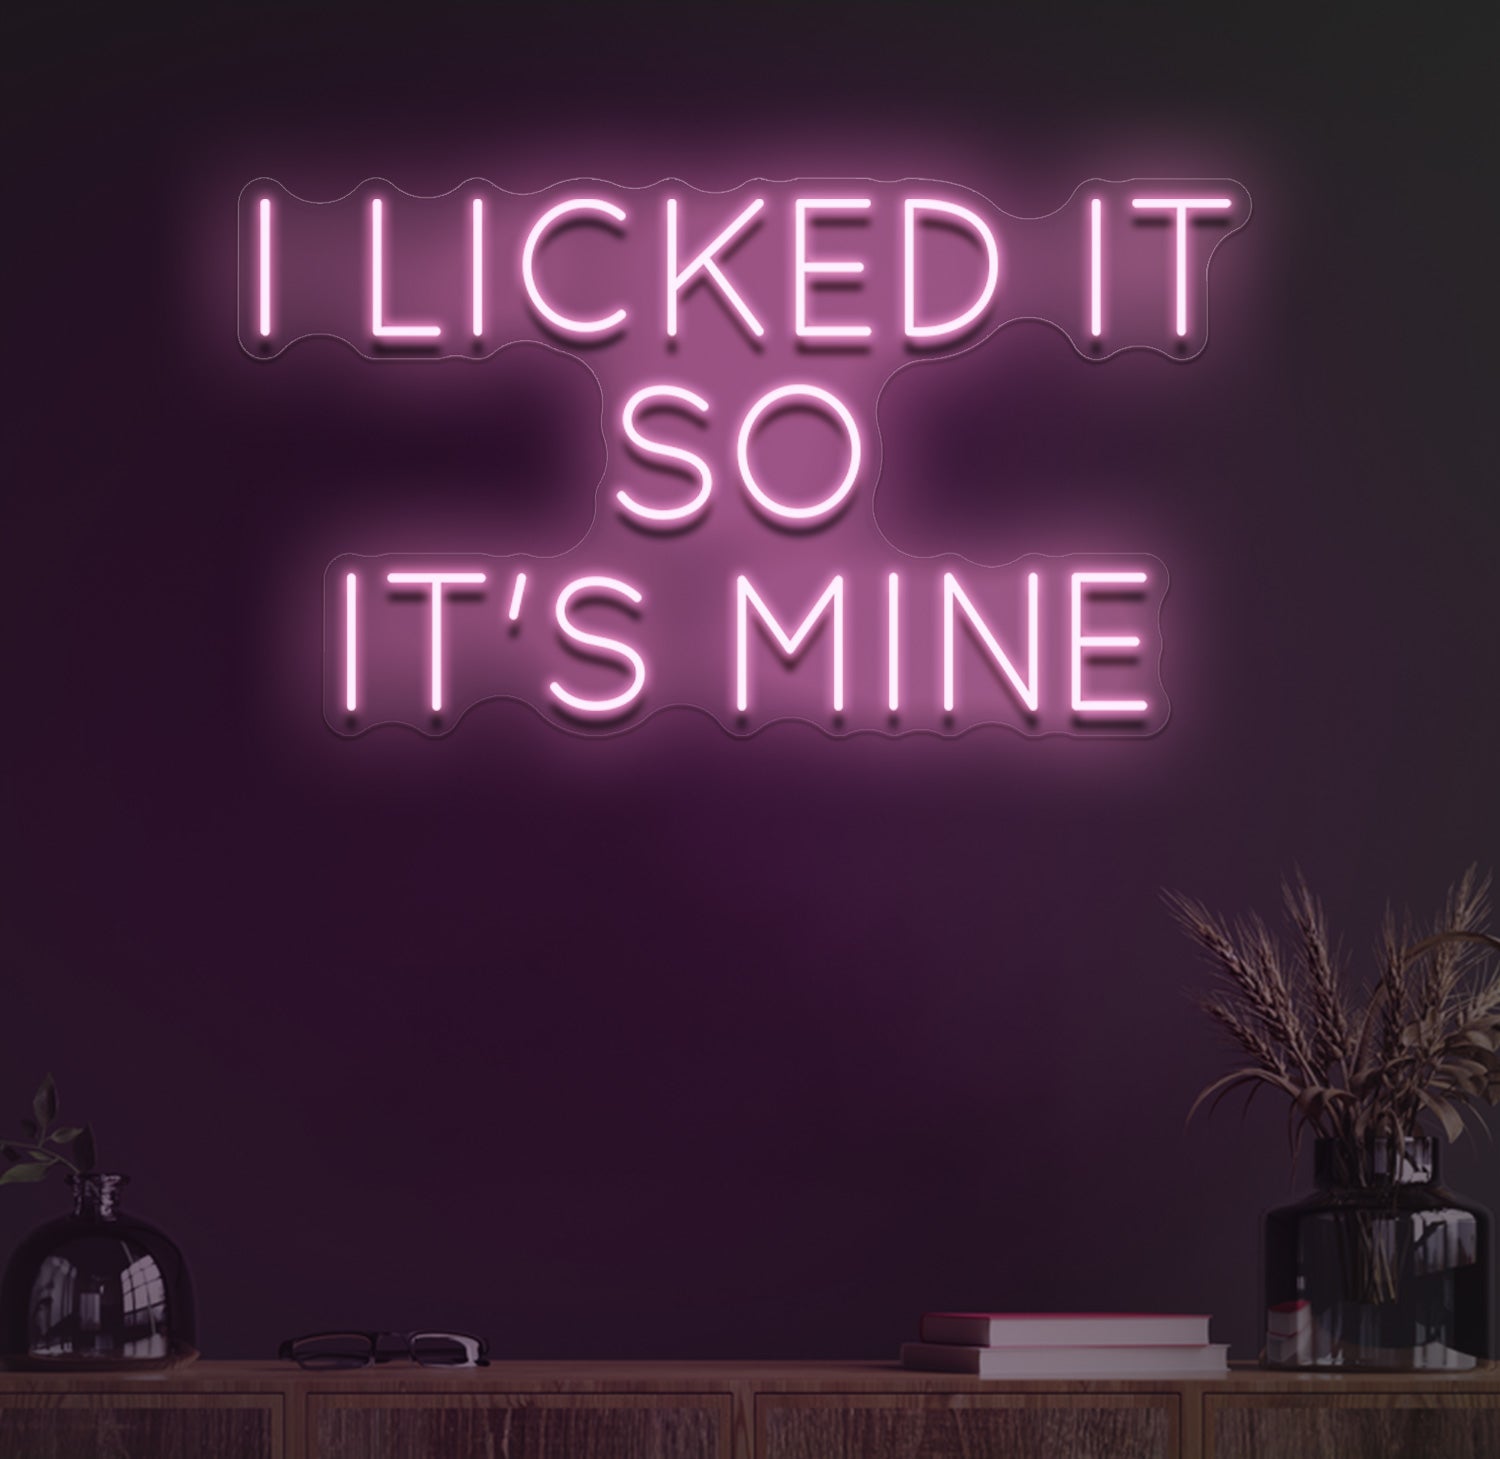 I Licked It So Its Mine Neon Sign